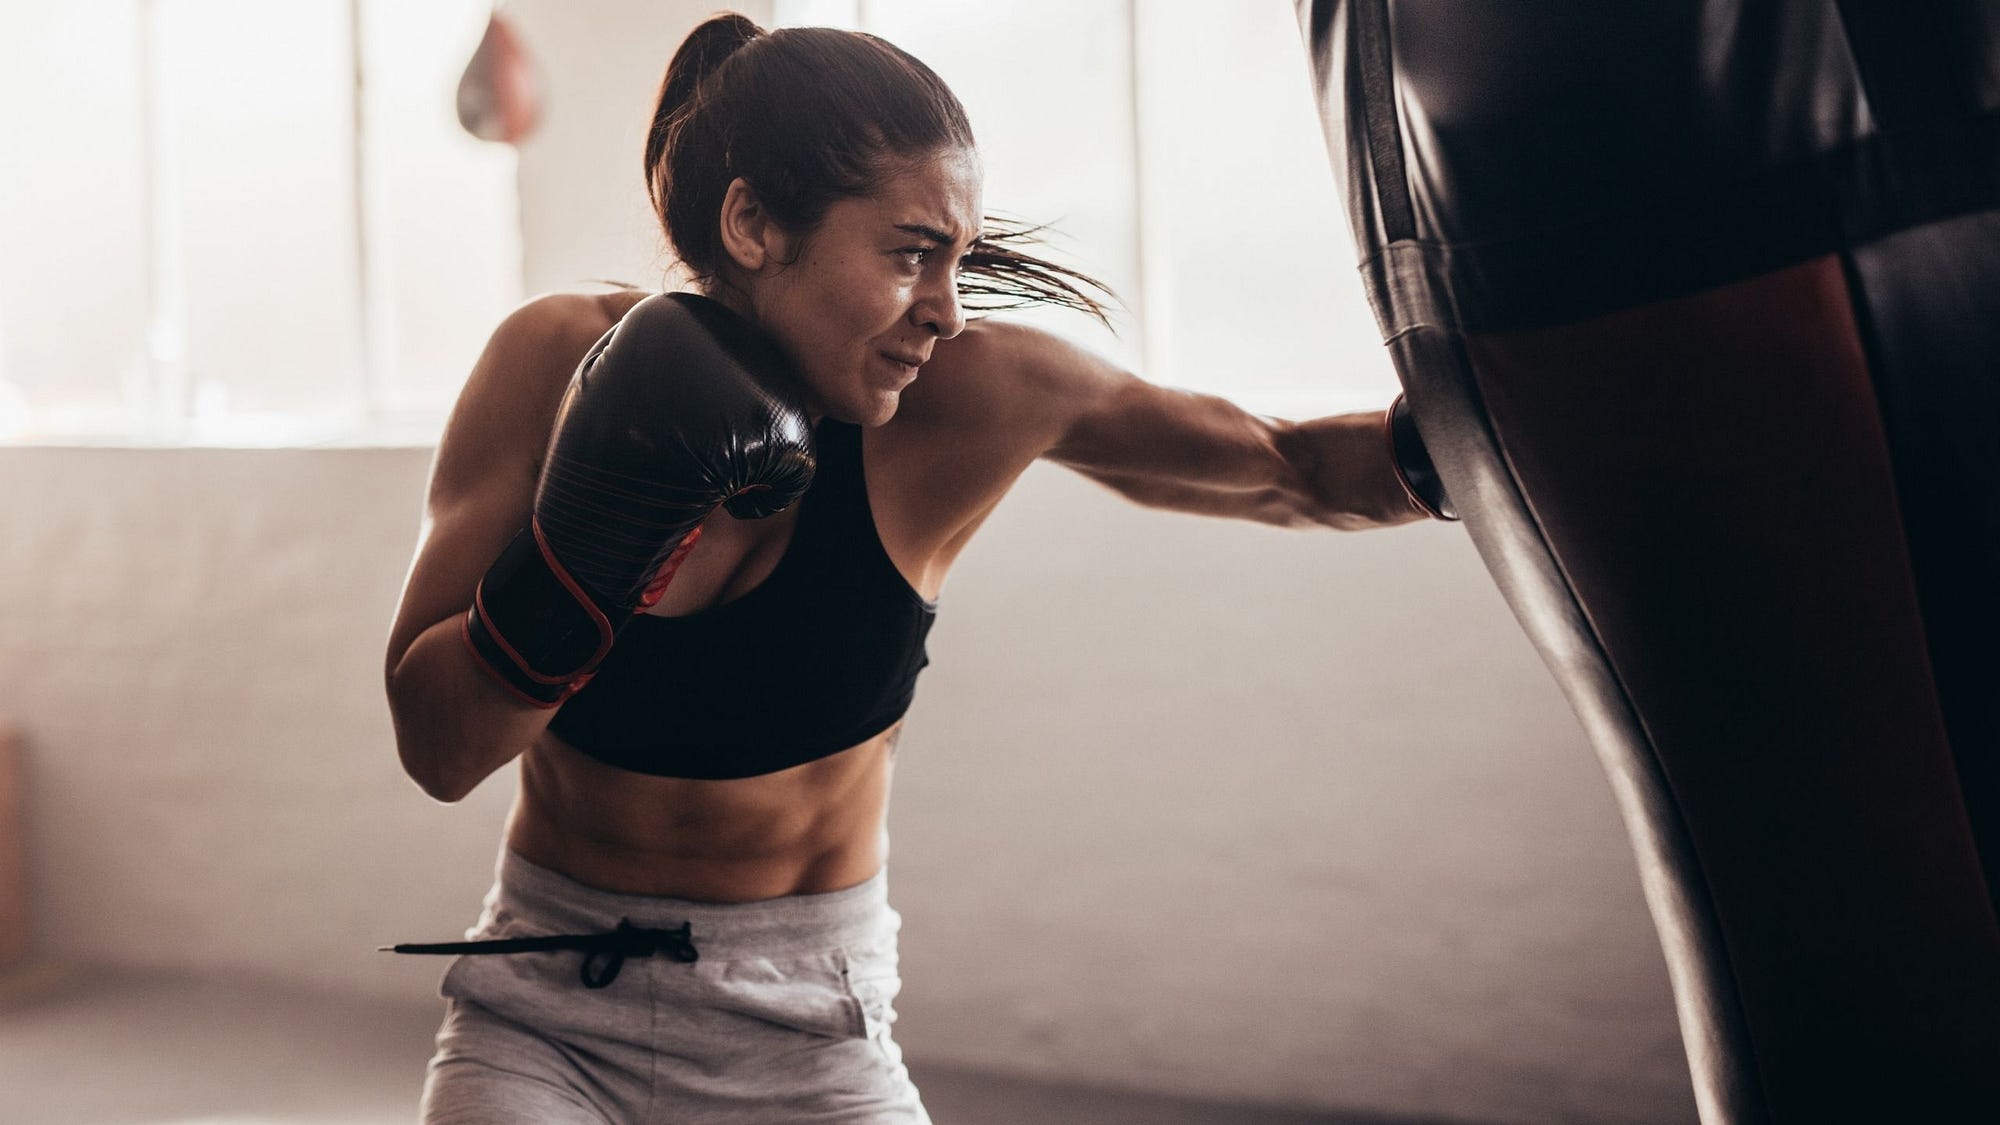 What heavy bag workout results can you expect? Medium